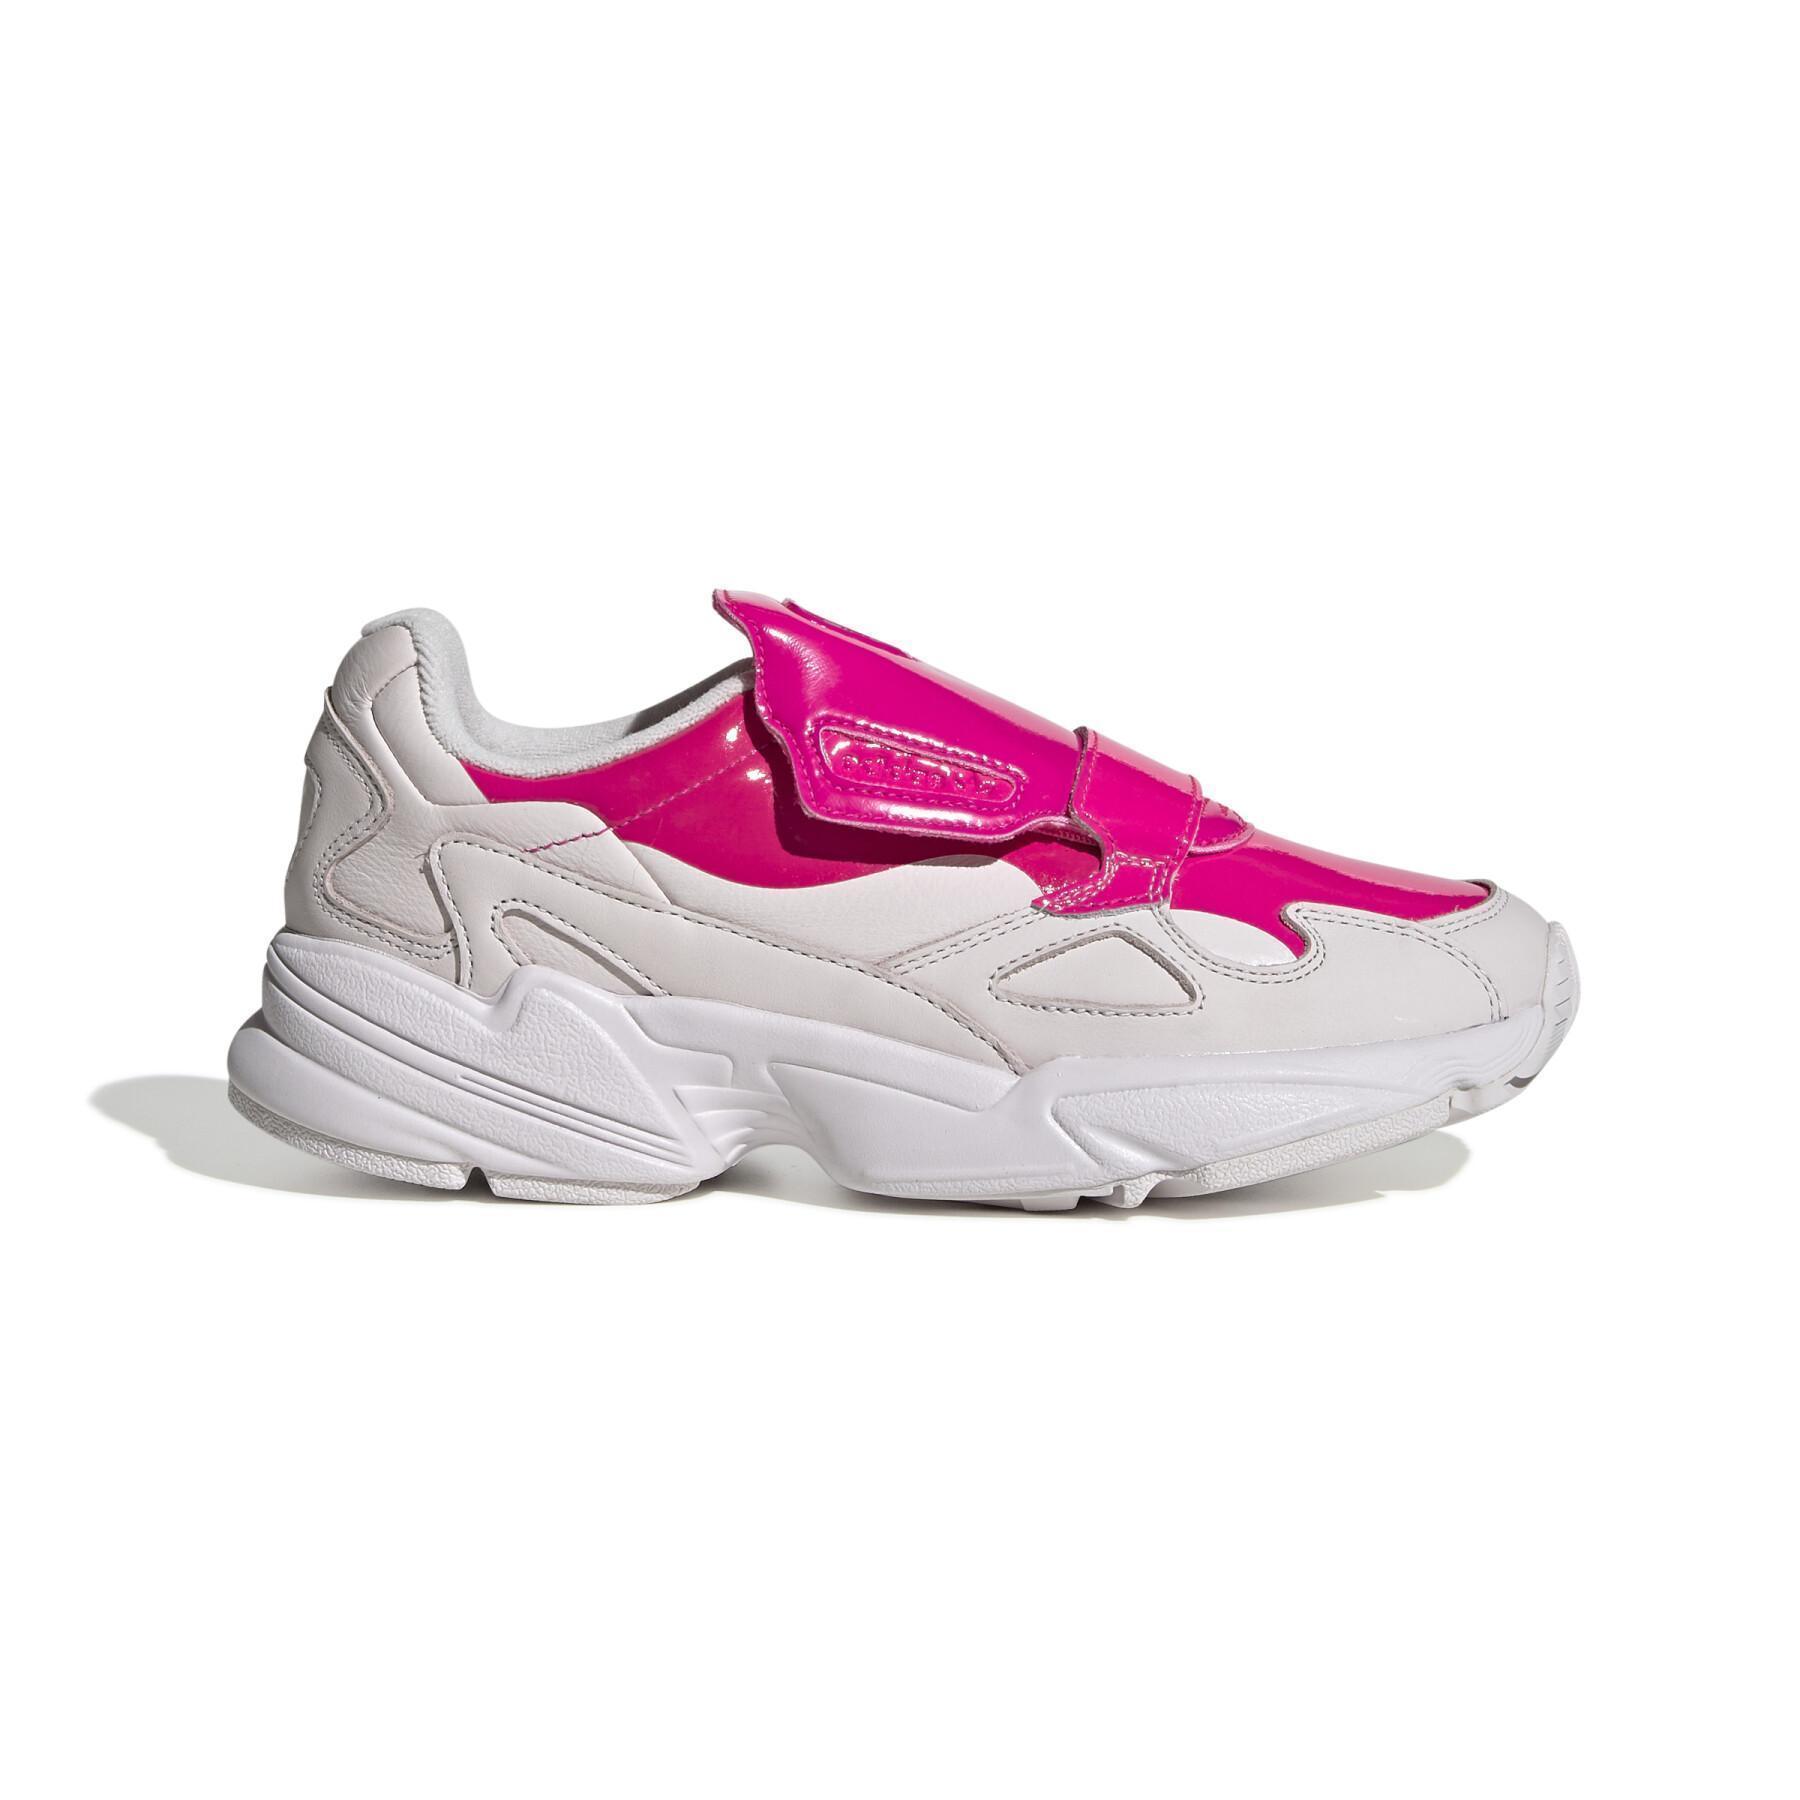 adidas Falcon RX Women's Sneakers - adidas - Women's Sneakers - Lifestyle